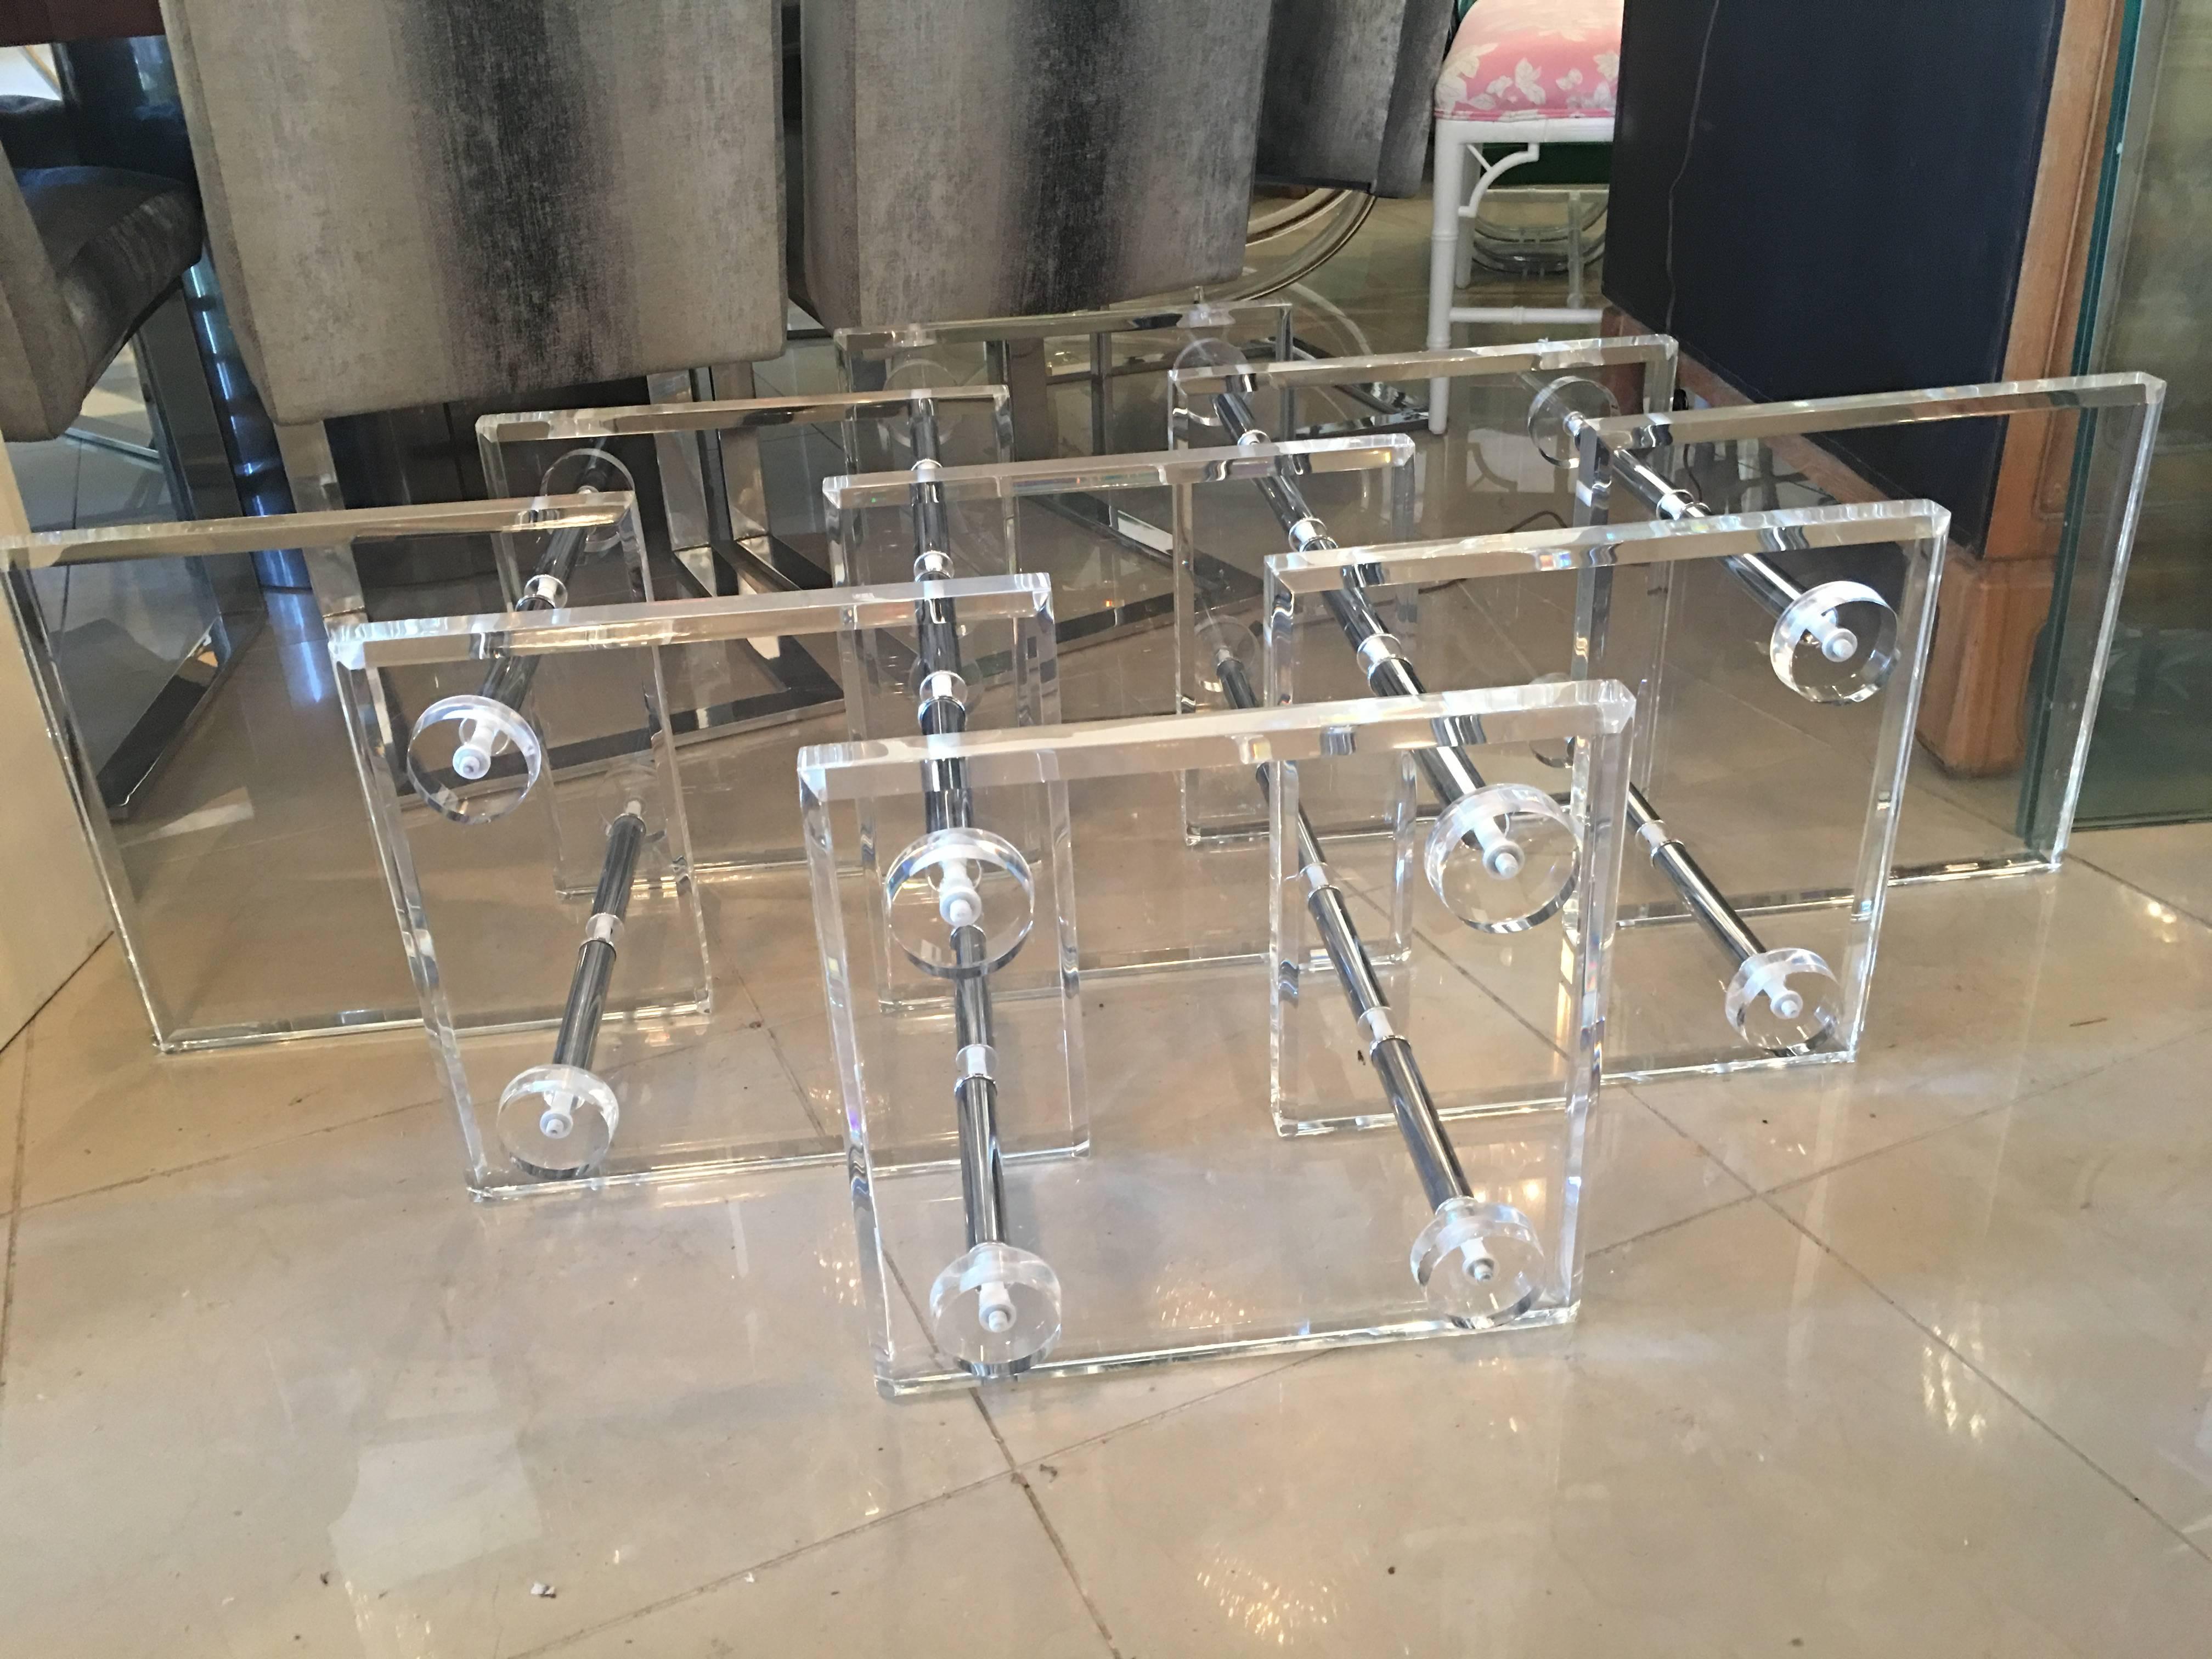 Monumental size vintage Lucite and chrome cocktail, coffee table. Glass top not included. Overall good condition with a few minor scuffs.